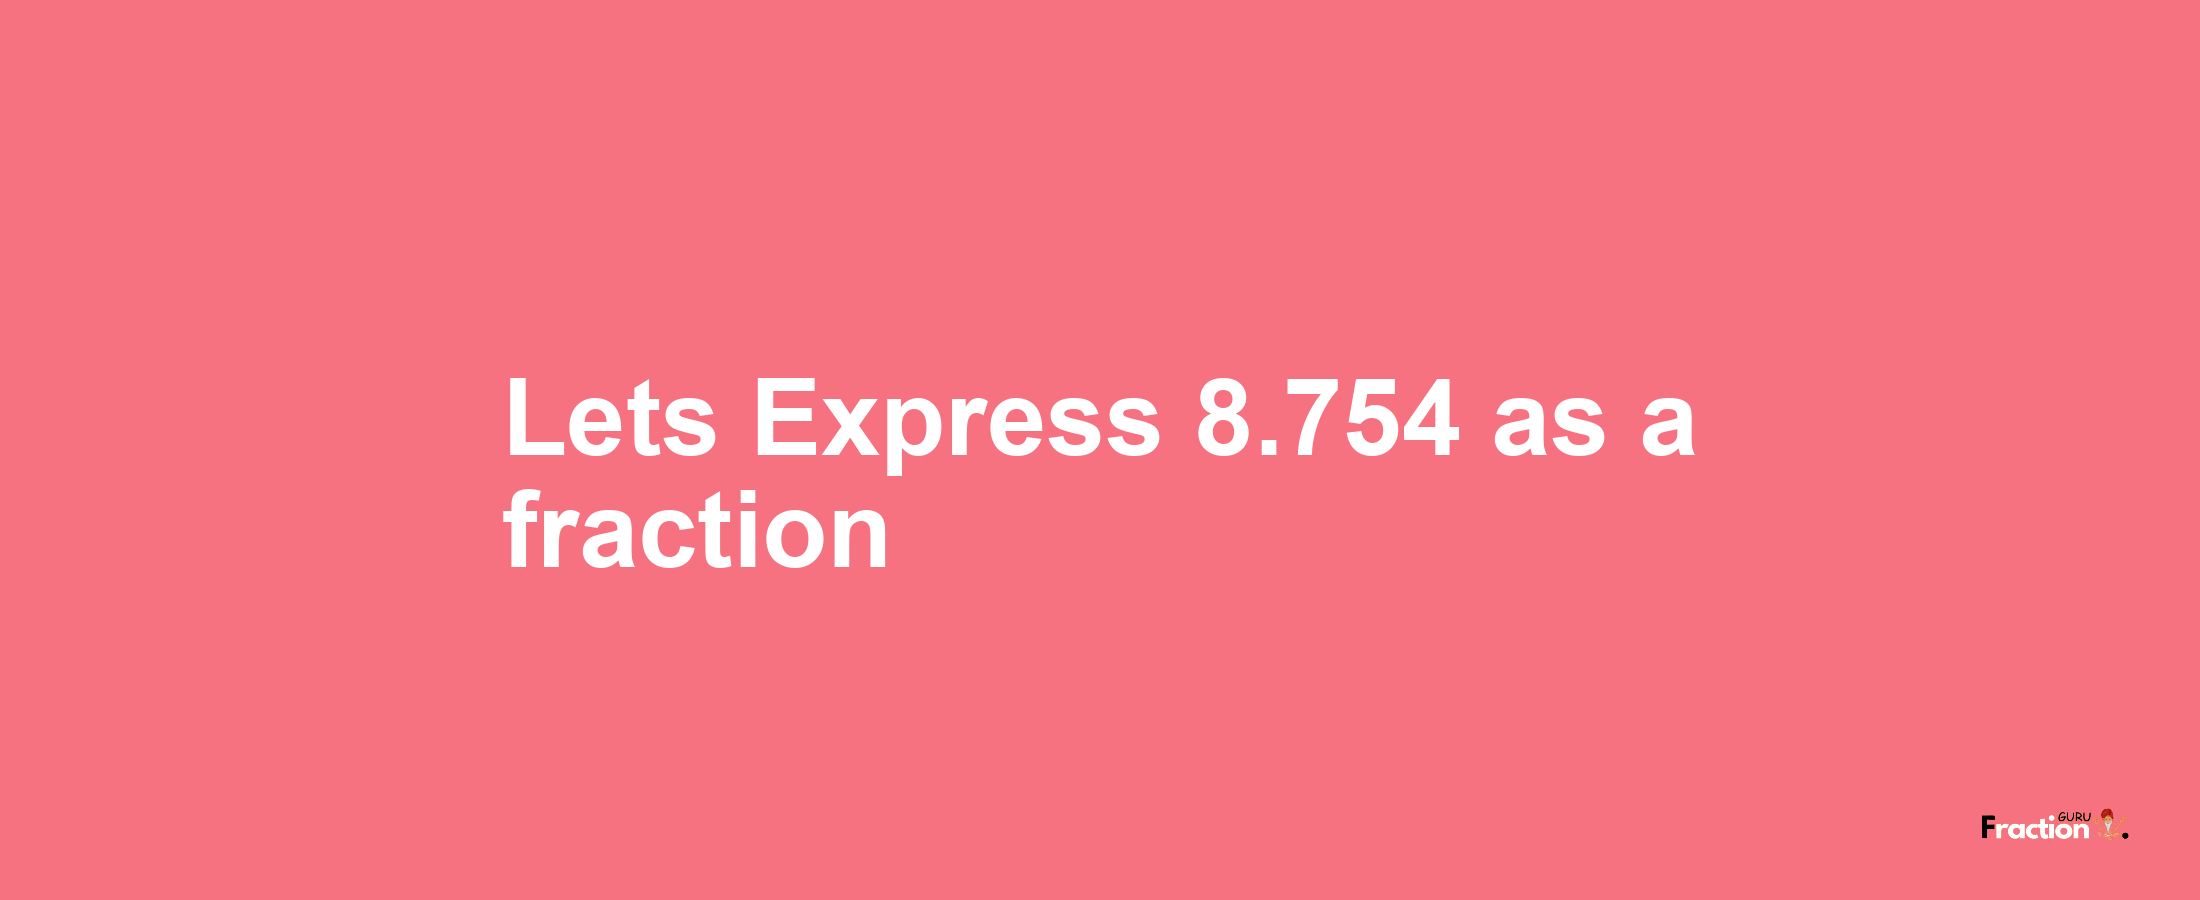 Lets Express 8.754 as afraction